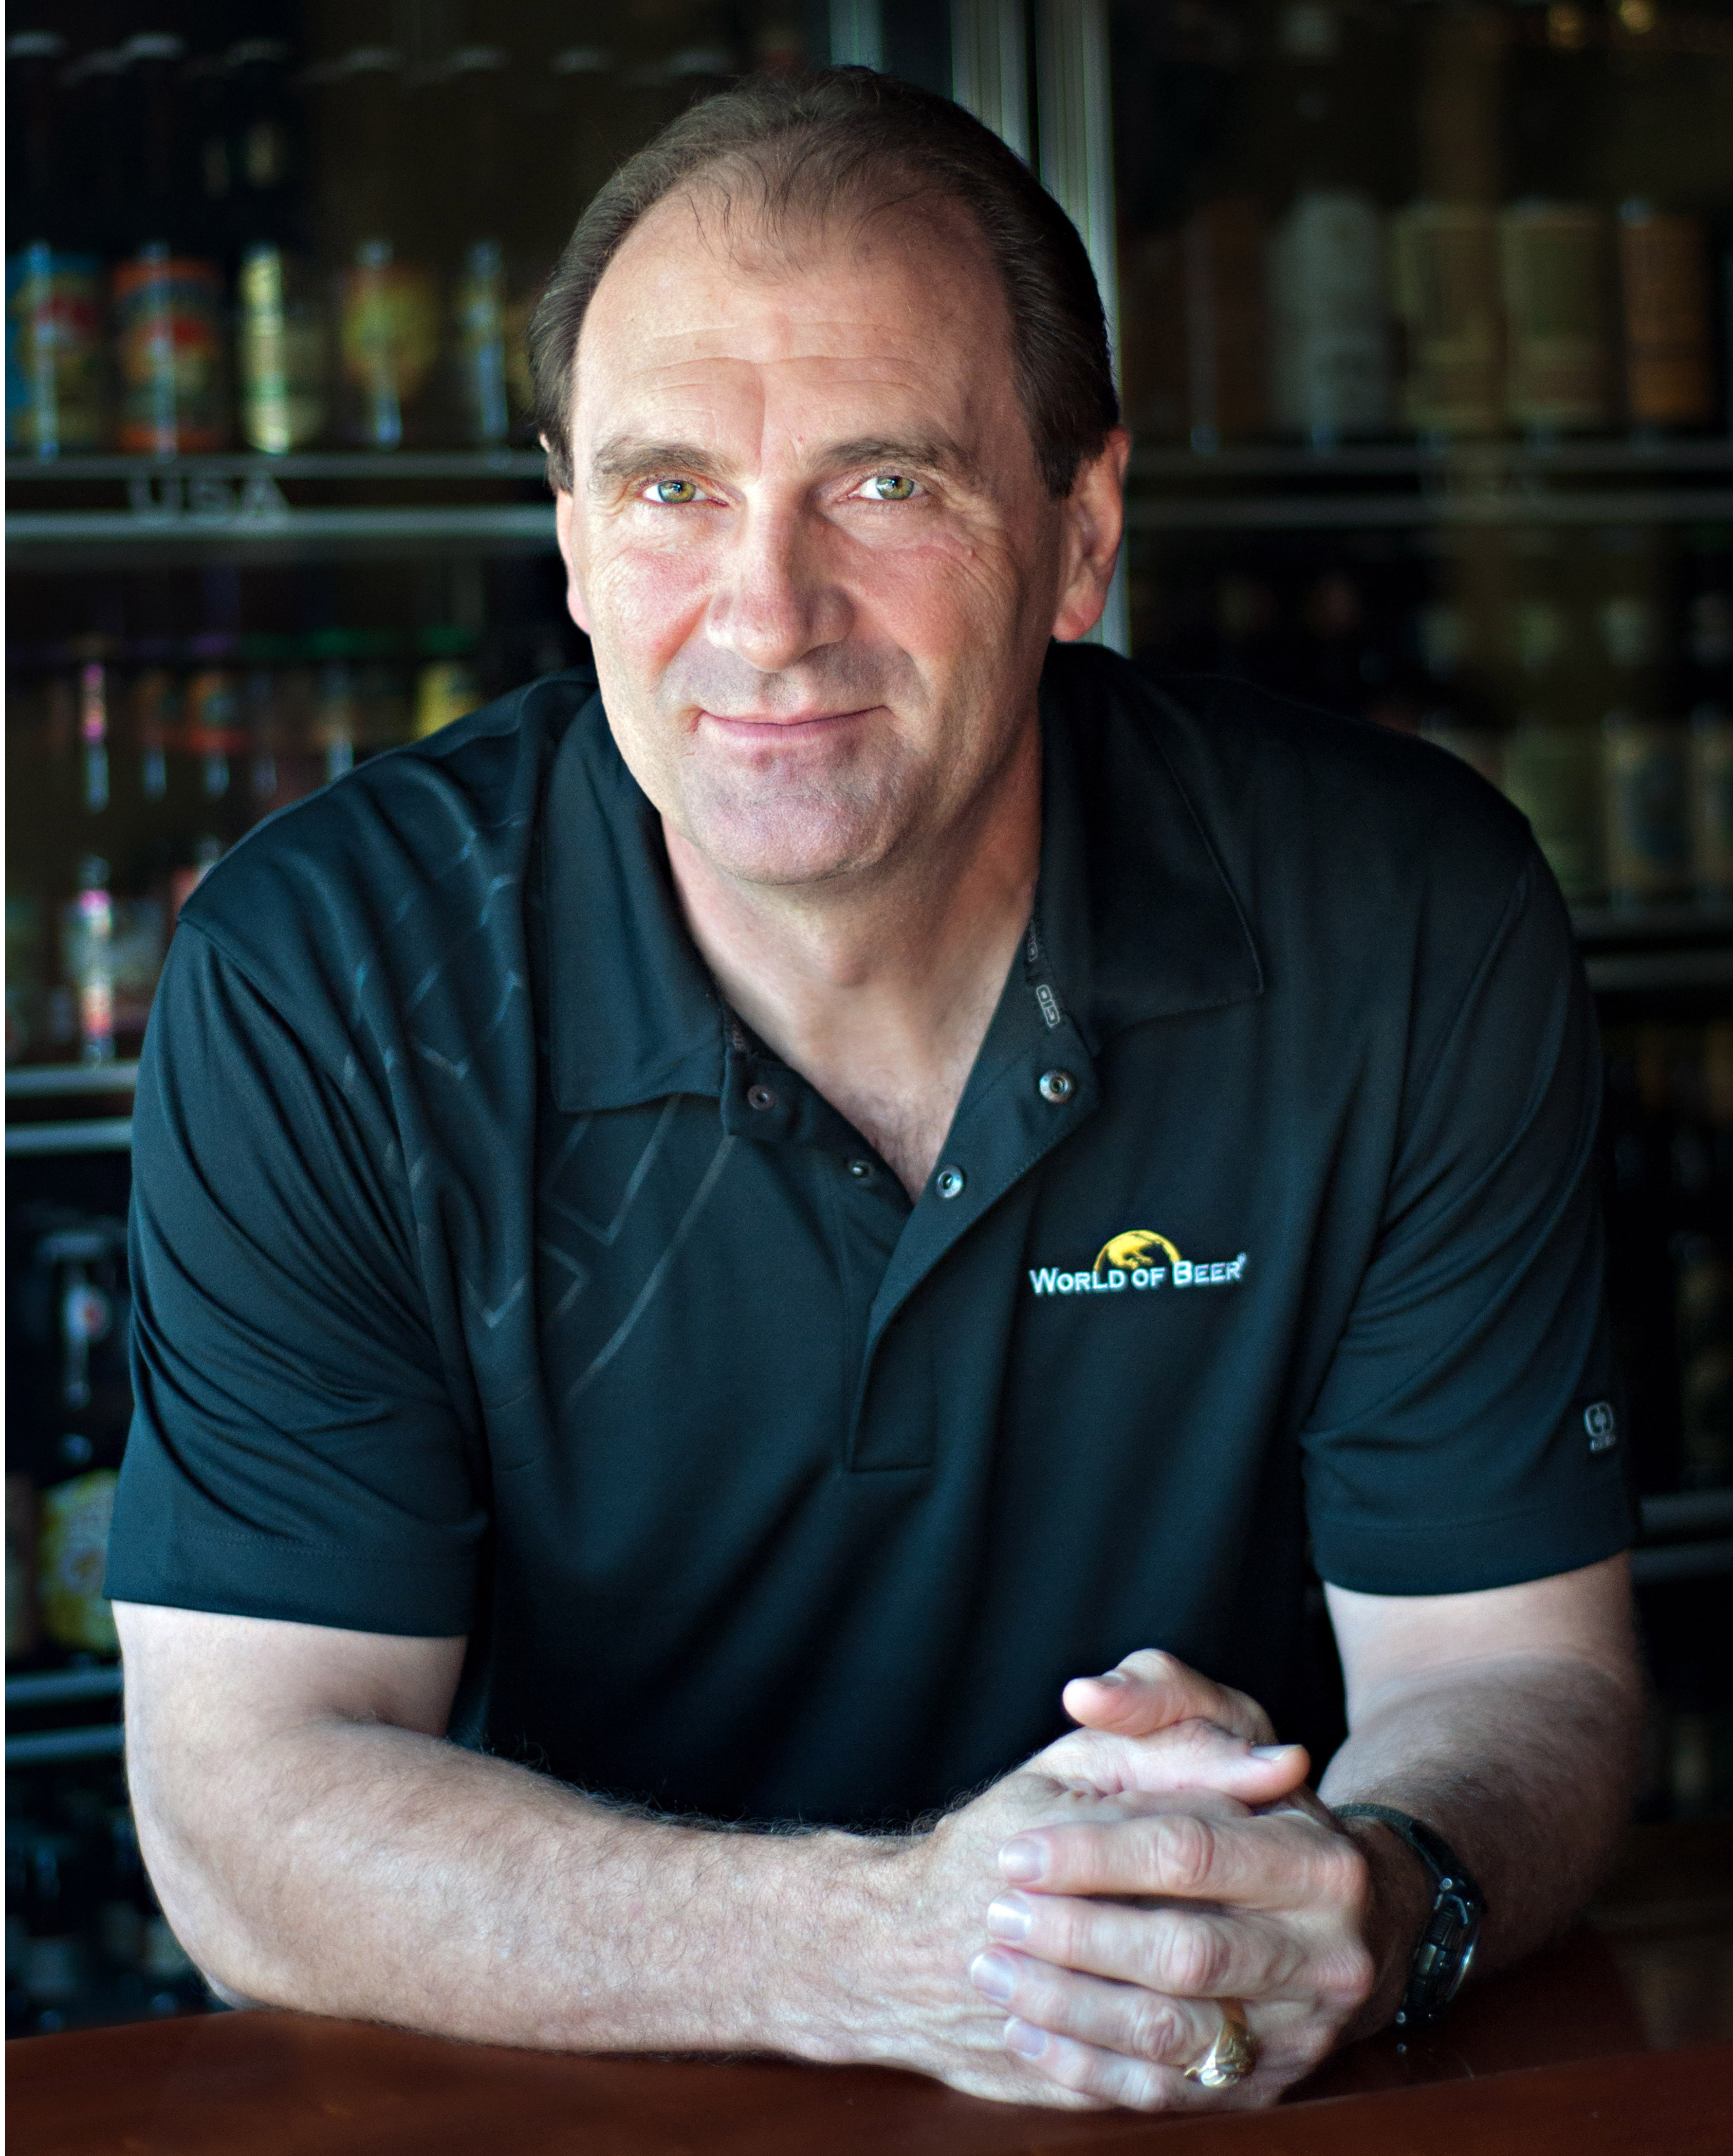 World of Beer CEO Paul Avery